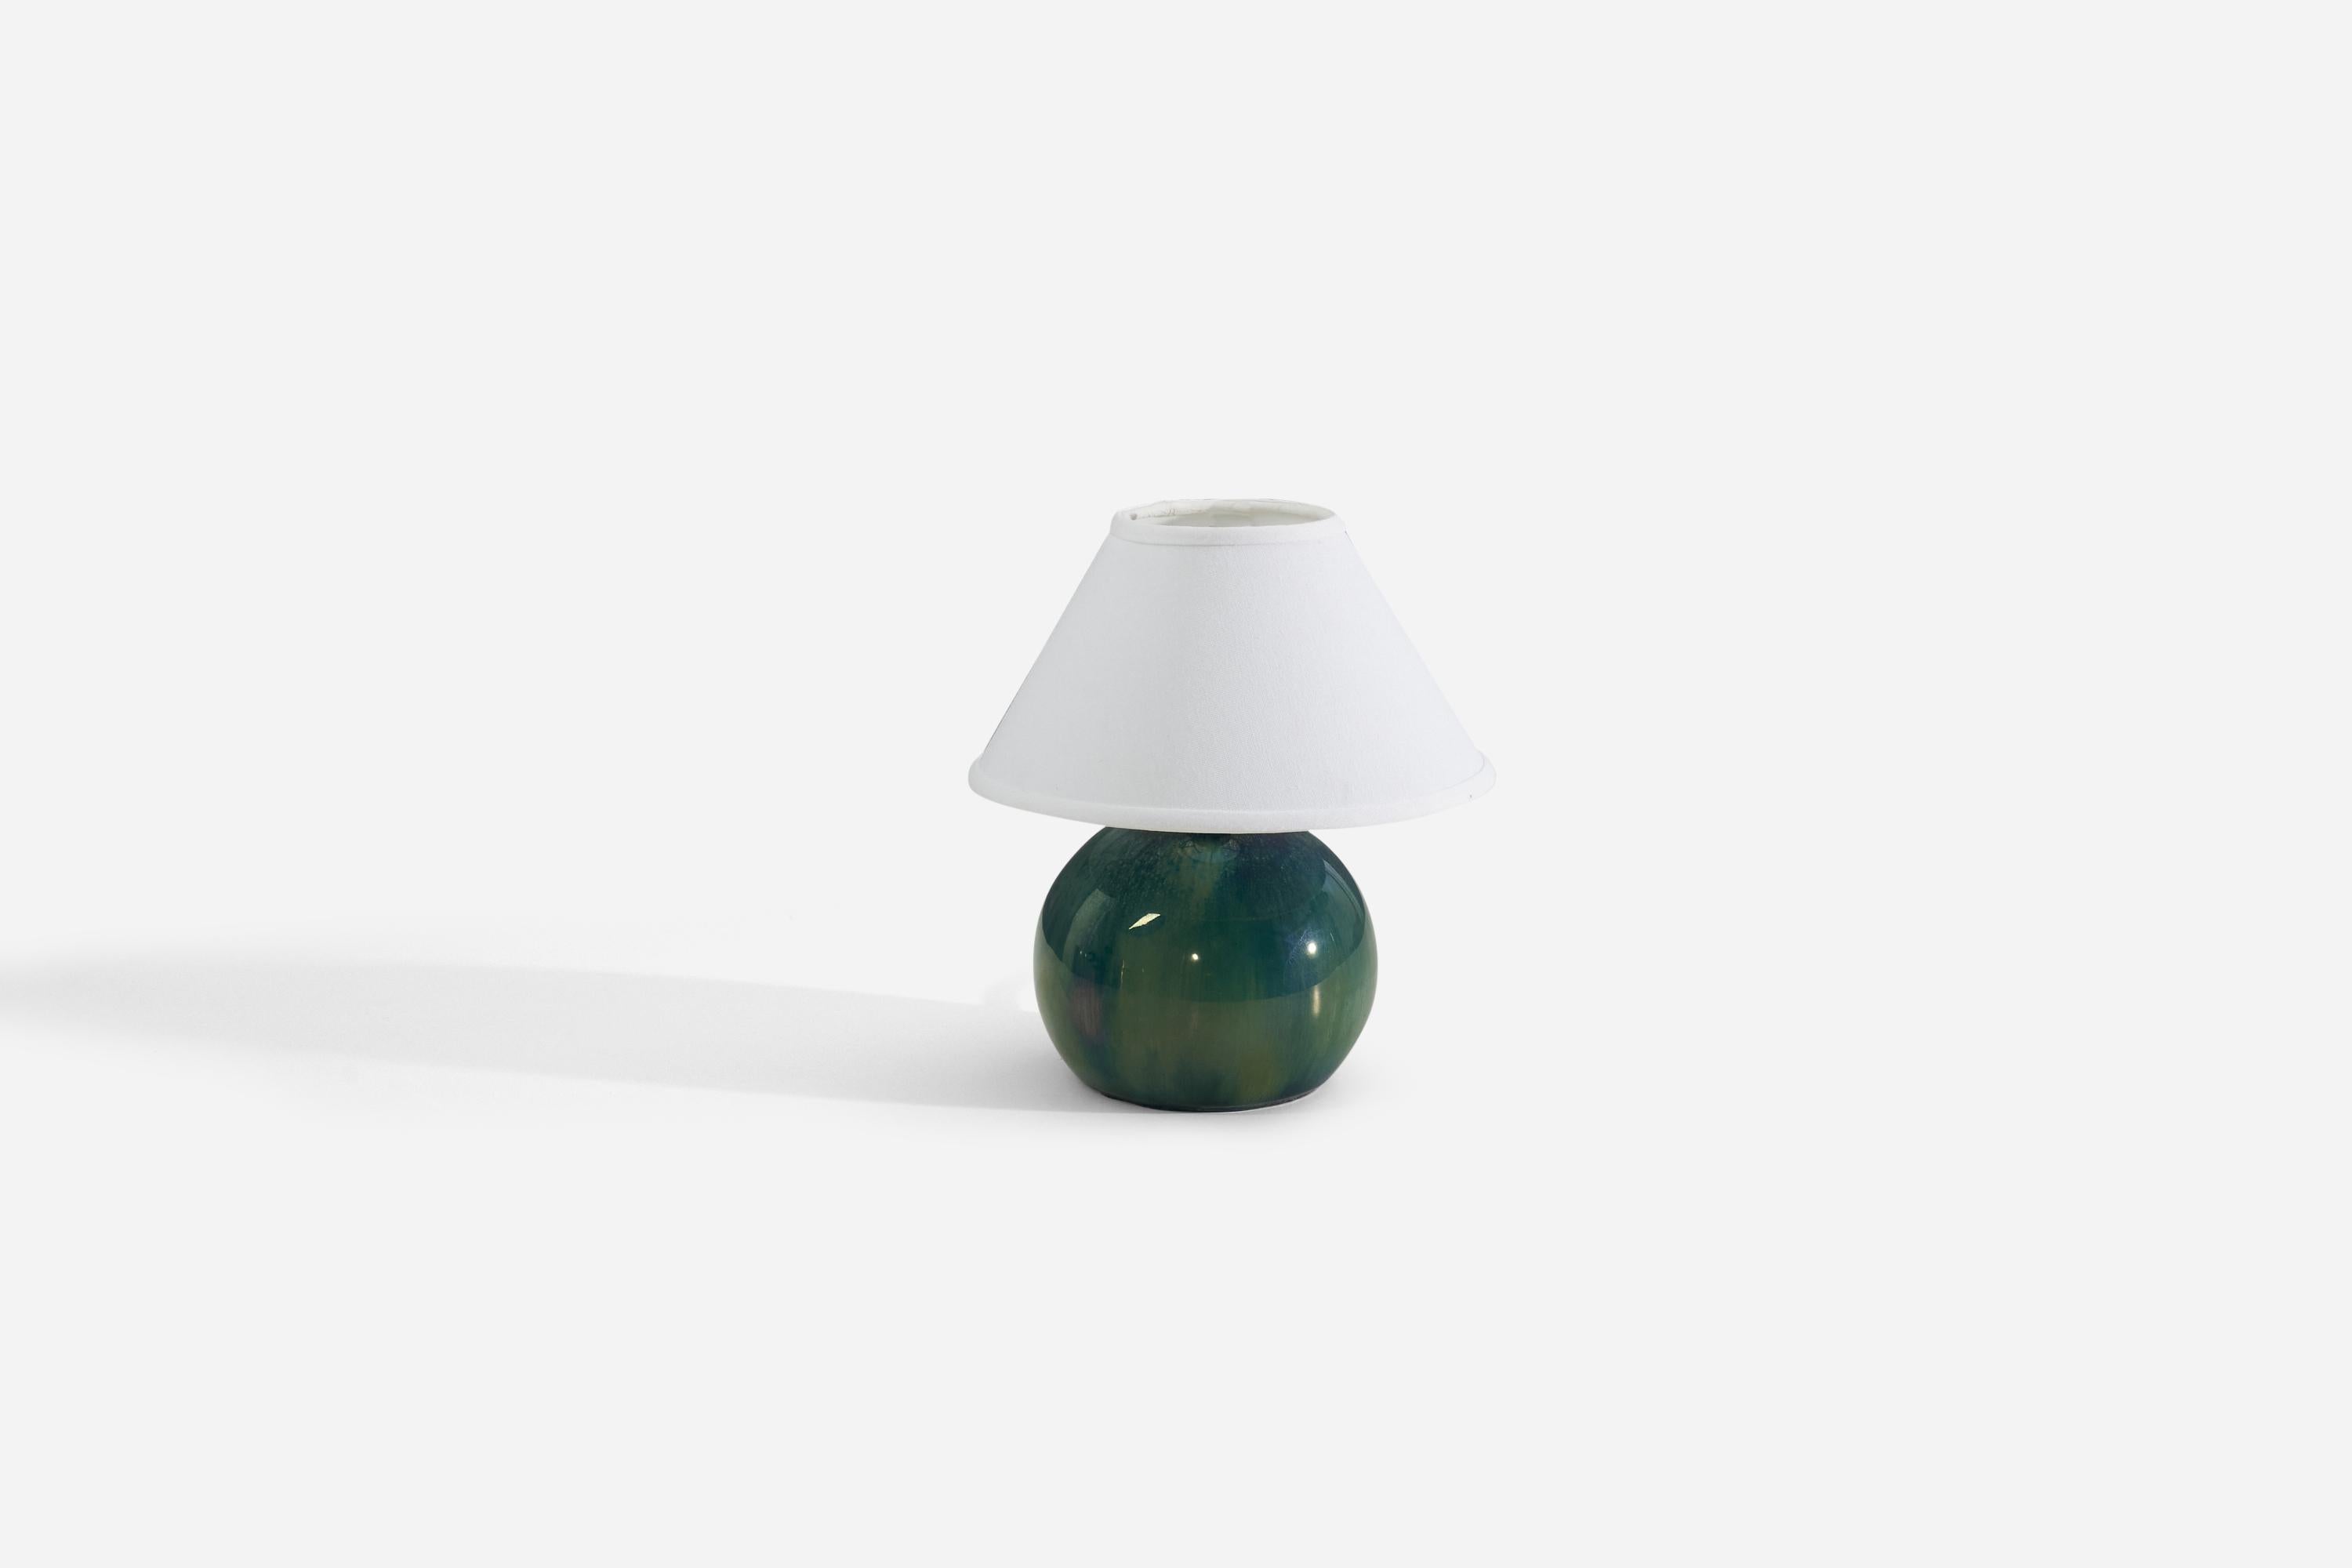 A green-glazed ceramic table lamp designed and produced in France, c. 1940s.

Measurements listed are of lamp, sold without lampshade.

For reference:

Shade : 4.5 x 10.25 x 6
Lamp with shade : 11 x 10.25 x 10.25.